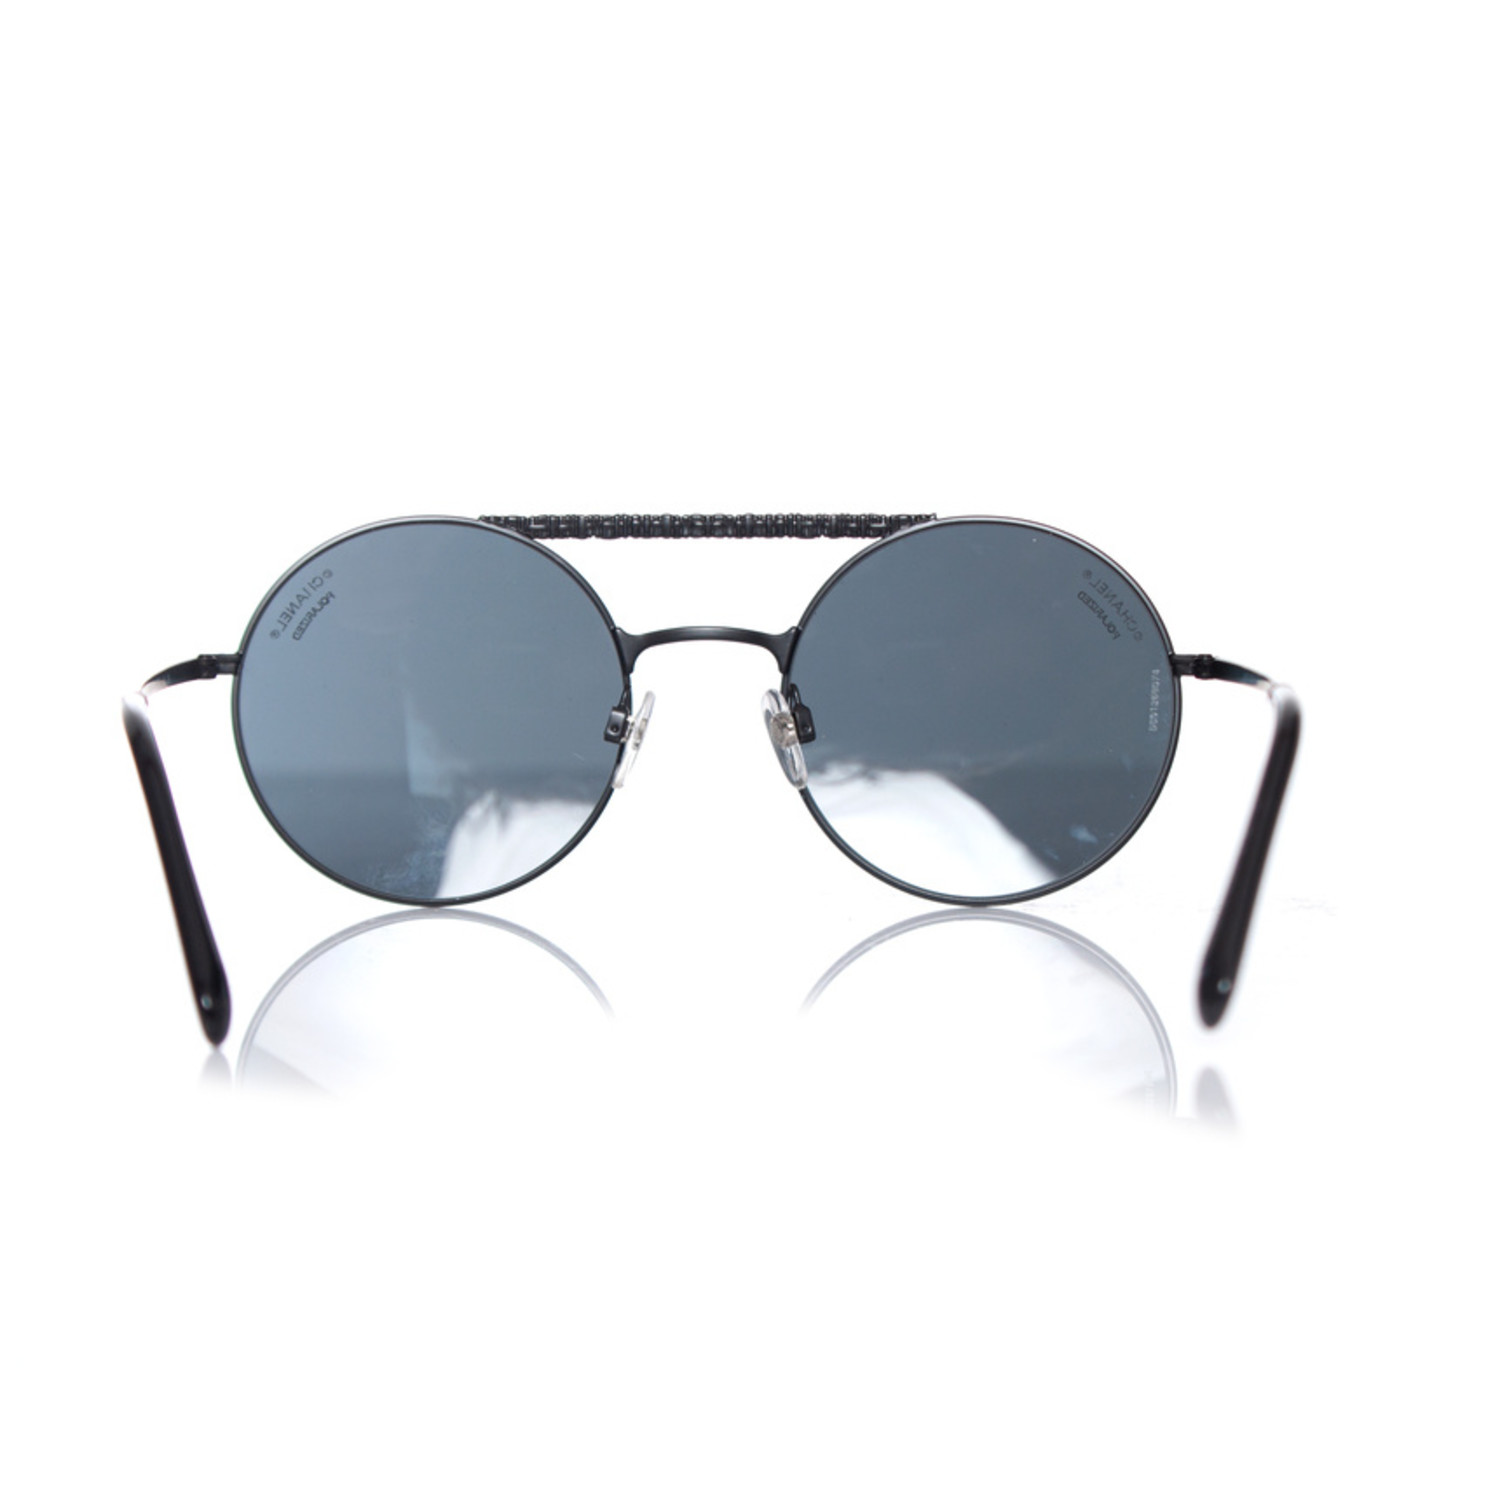 CHANEL Black Round Sunglasses for Women for sale